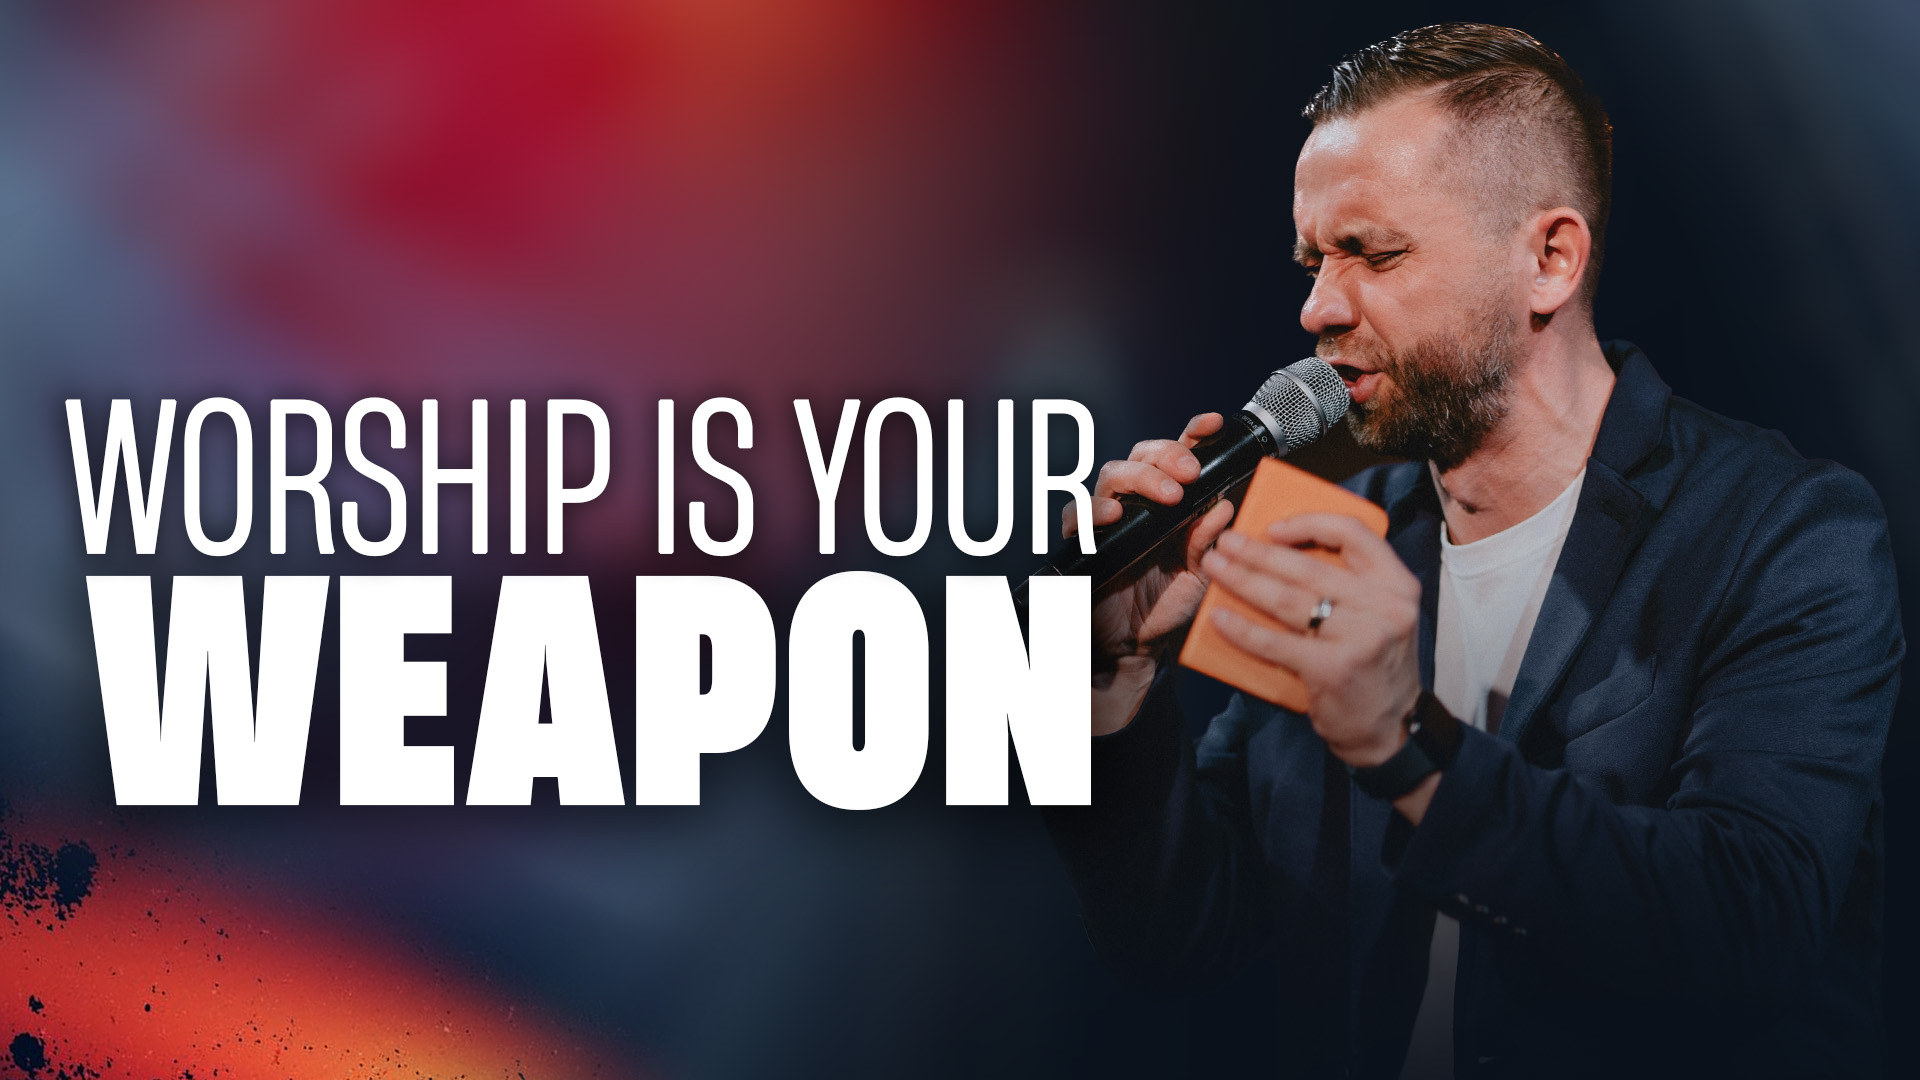 Featured Image for “Worship is Your Weapon”